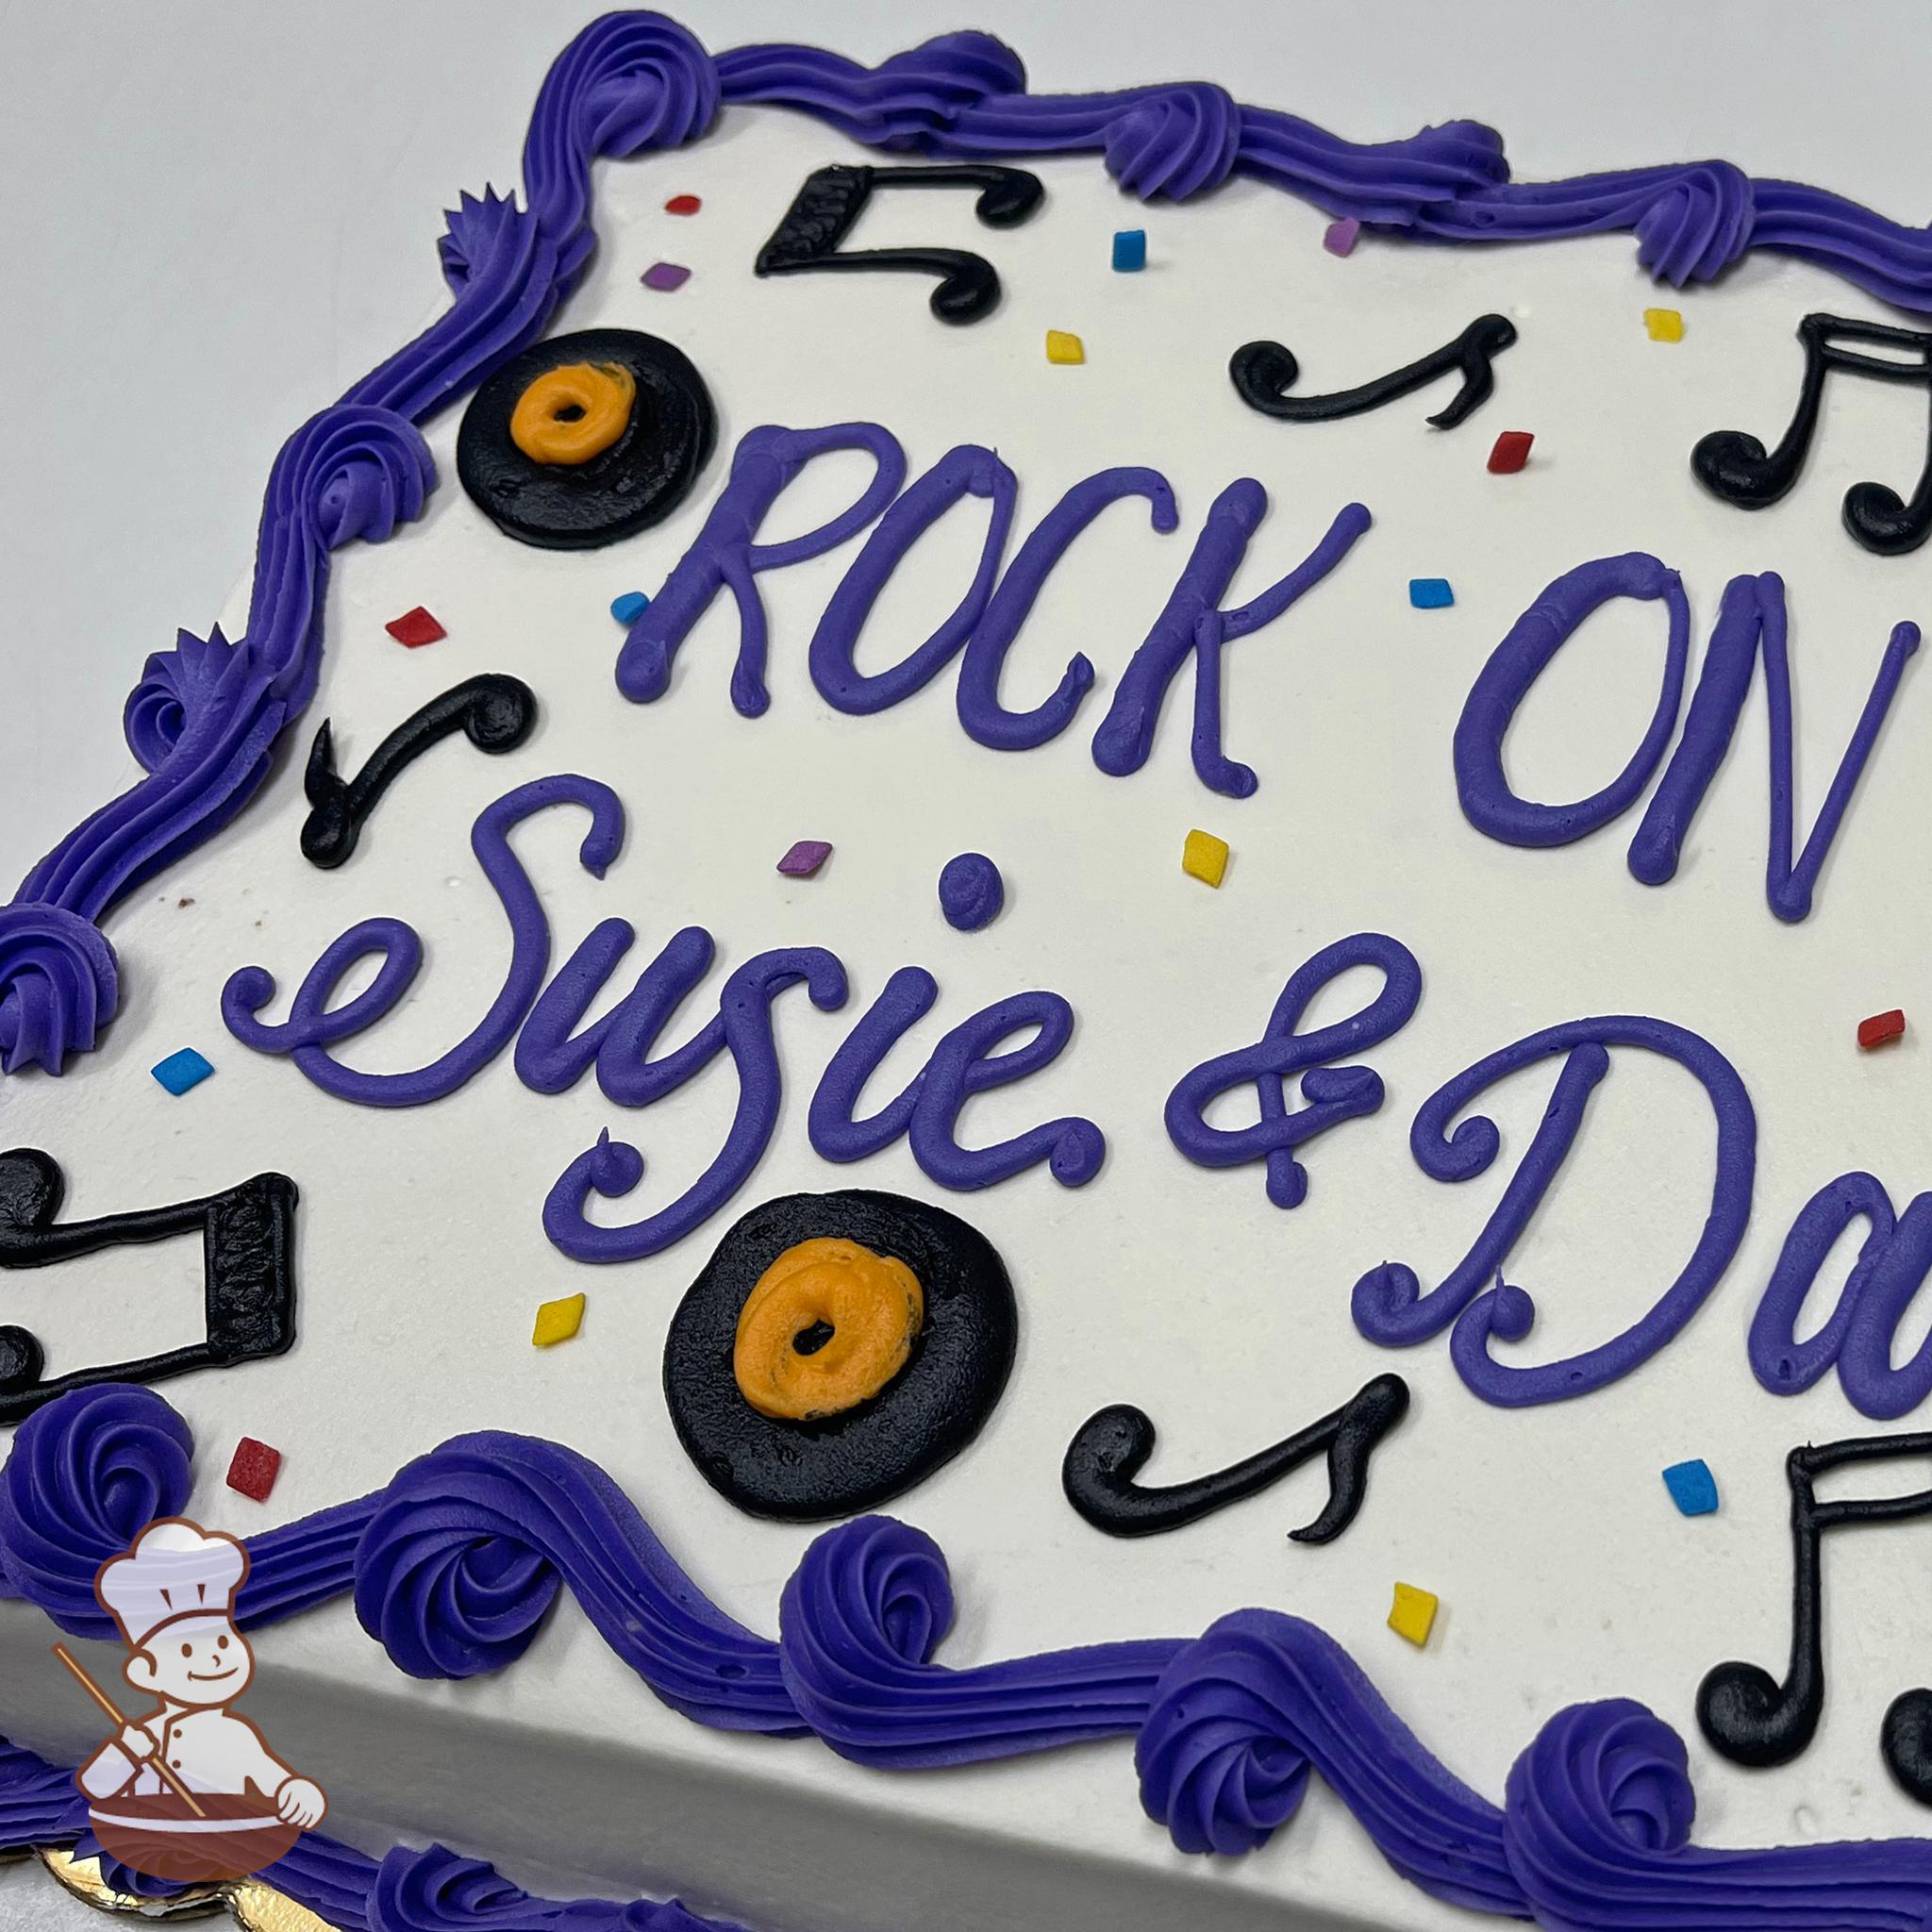 Music Notes Cake Topper Muffin Cupcake Party Decoration Edible Birthday  Guitar | eBay